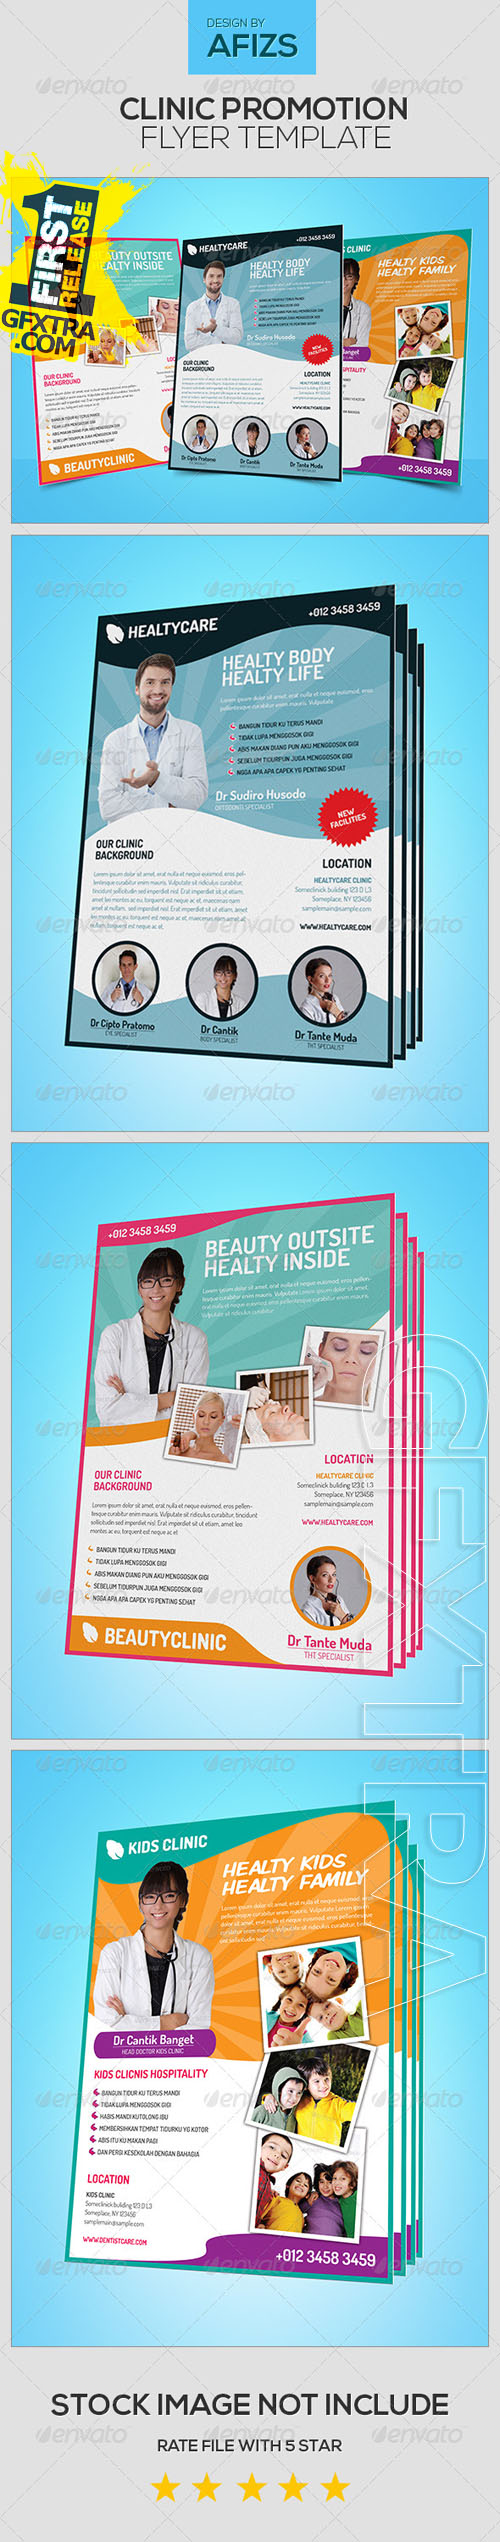 GraphicRiver - Clinic Promotion Flyer 5522759